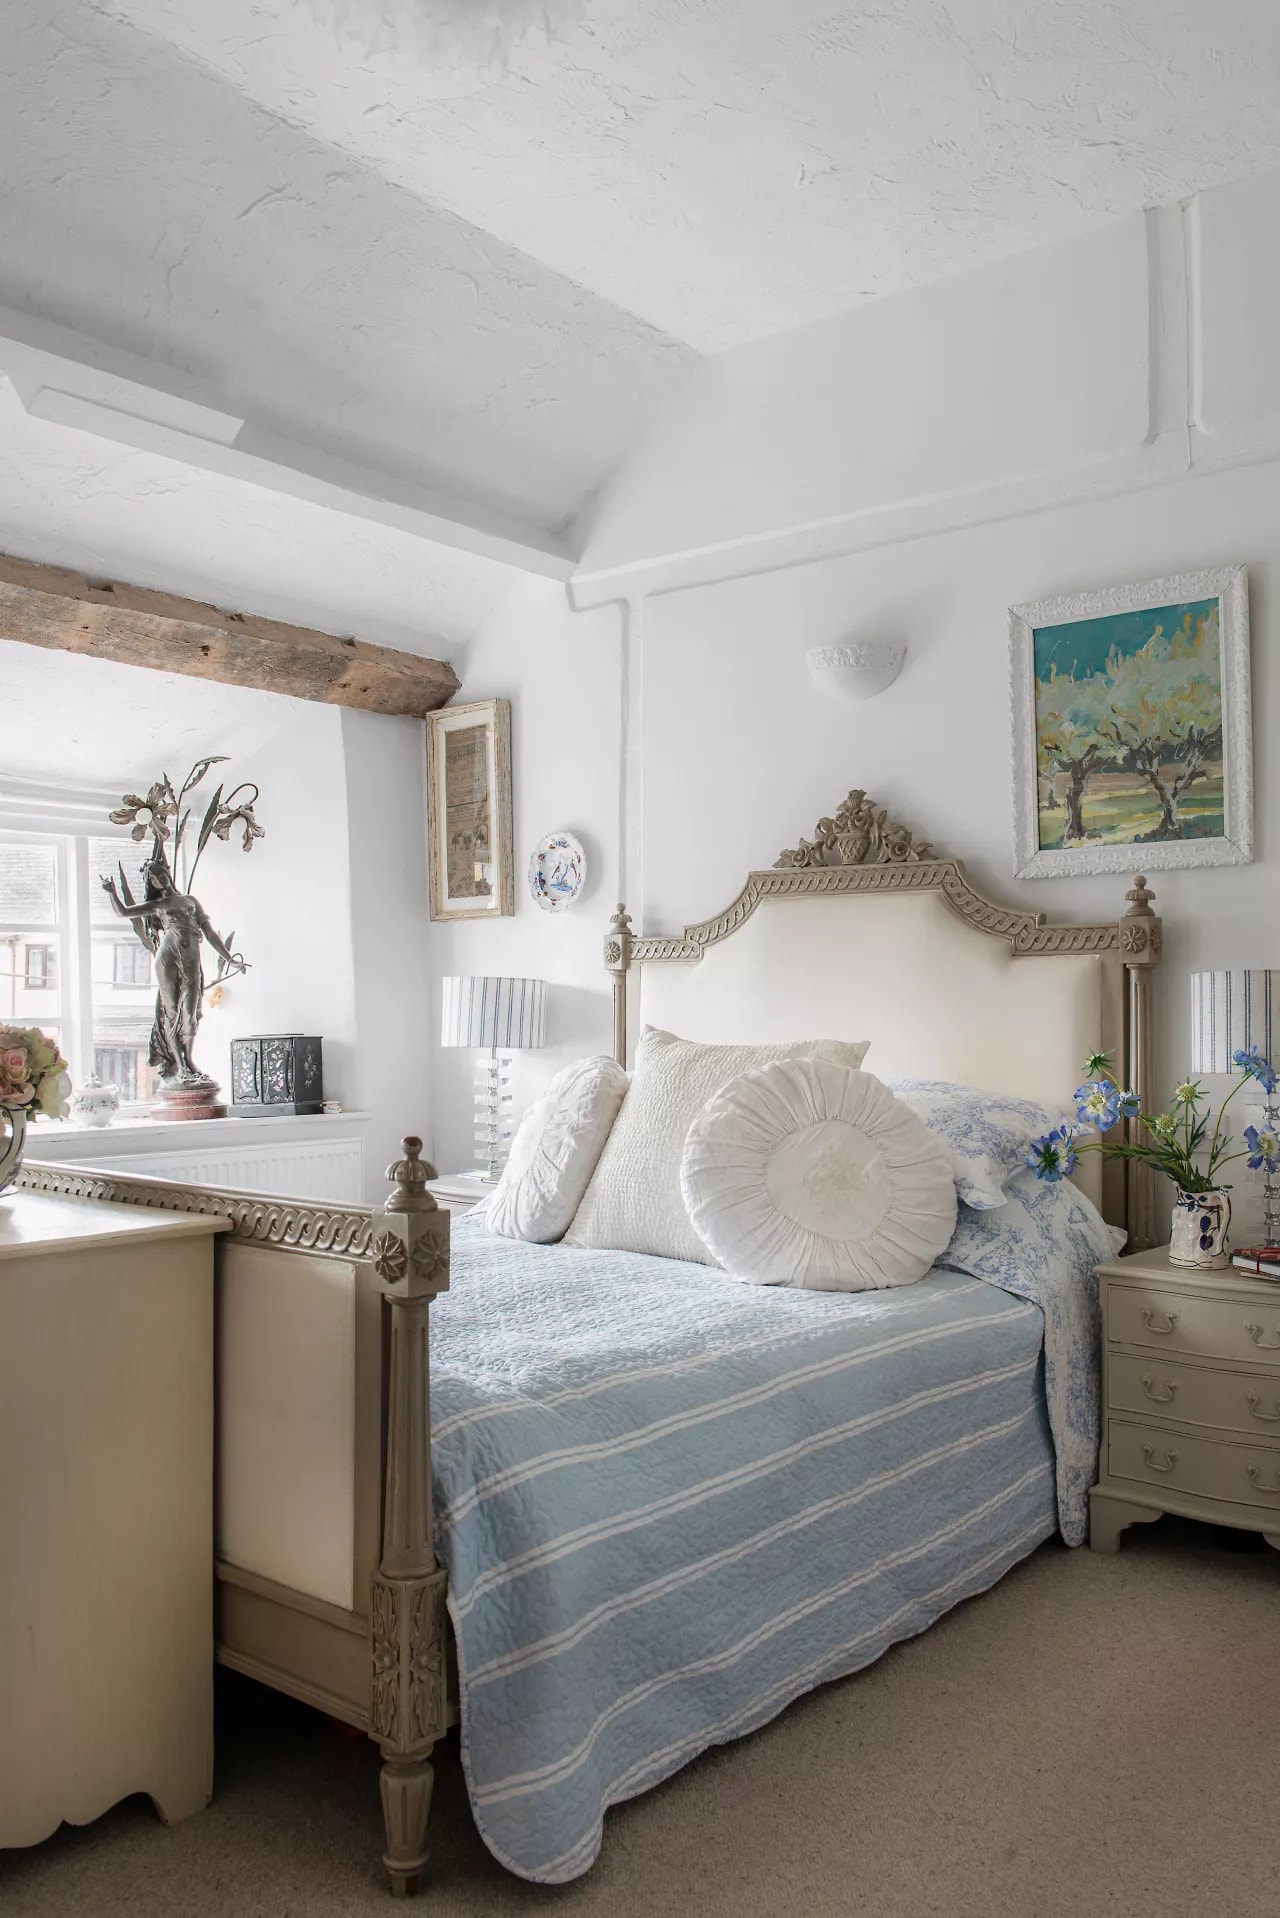 Marketplace, Bathrooms, Bedrooms & More – French Country Fridays 275